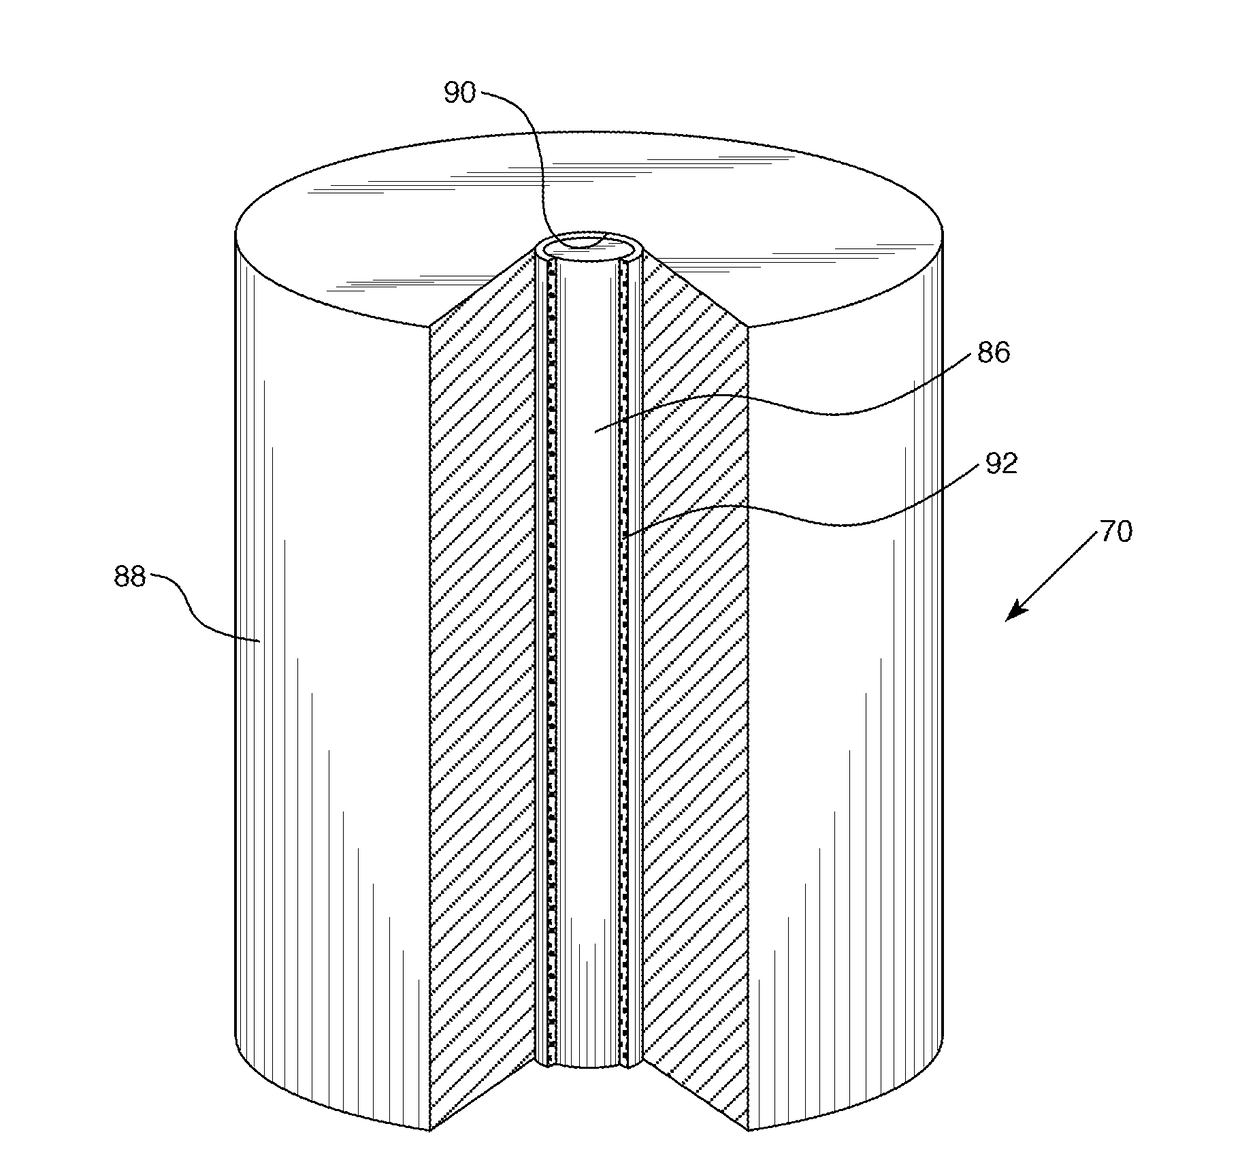 Annular nuclear fuel pellets with discrete burnable absorber pins